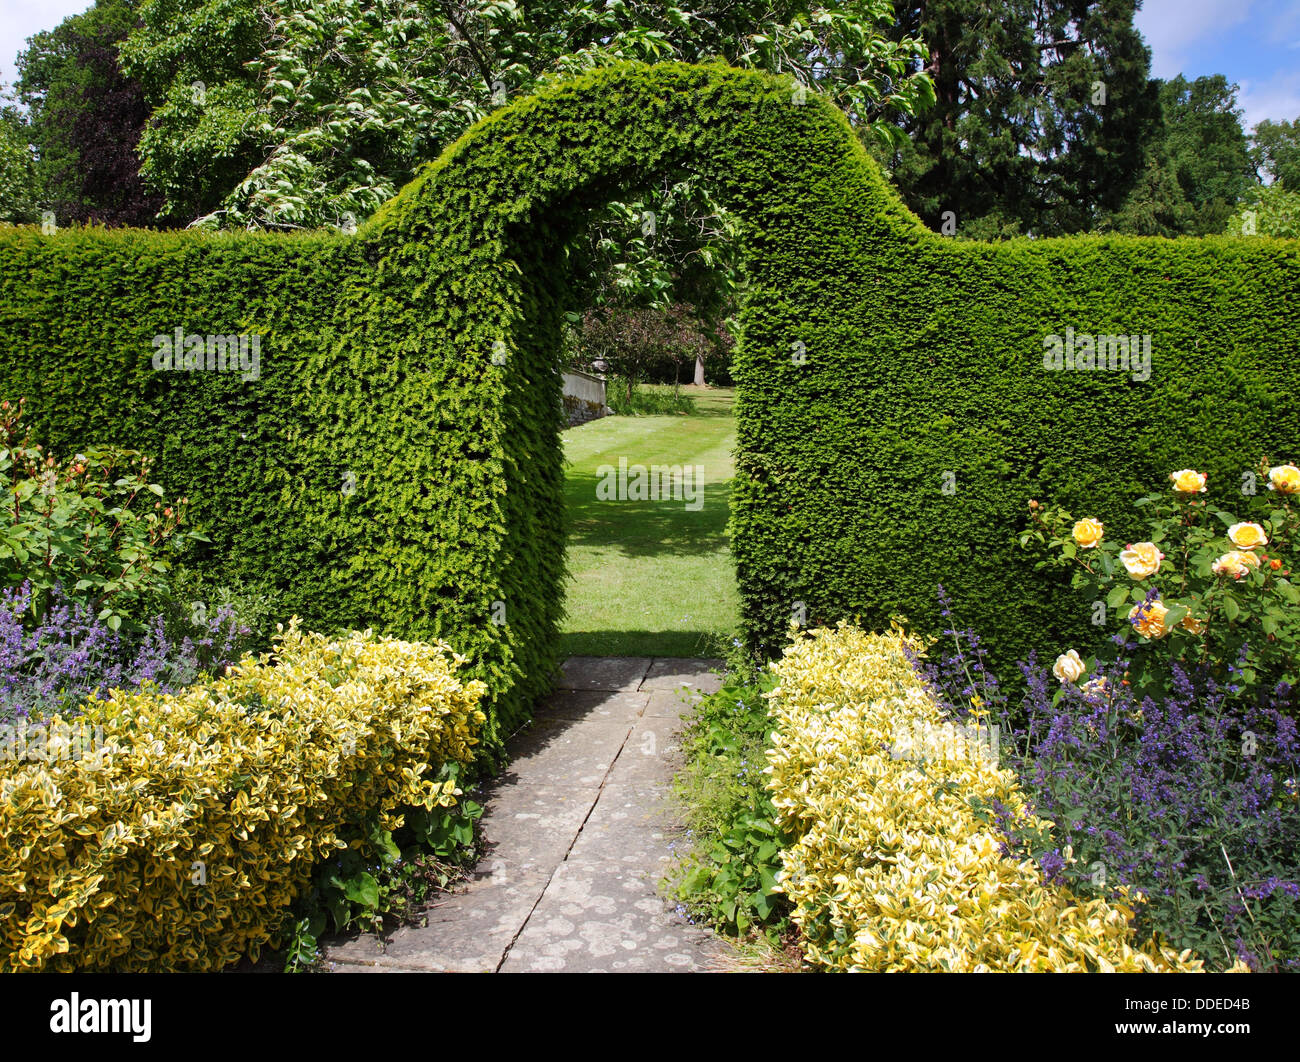 An English Landscape Garden in early Summer with flowerbeds and an Arch through a Hedgerow Stock Photo